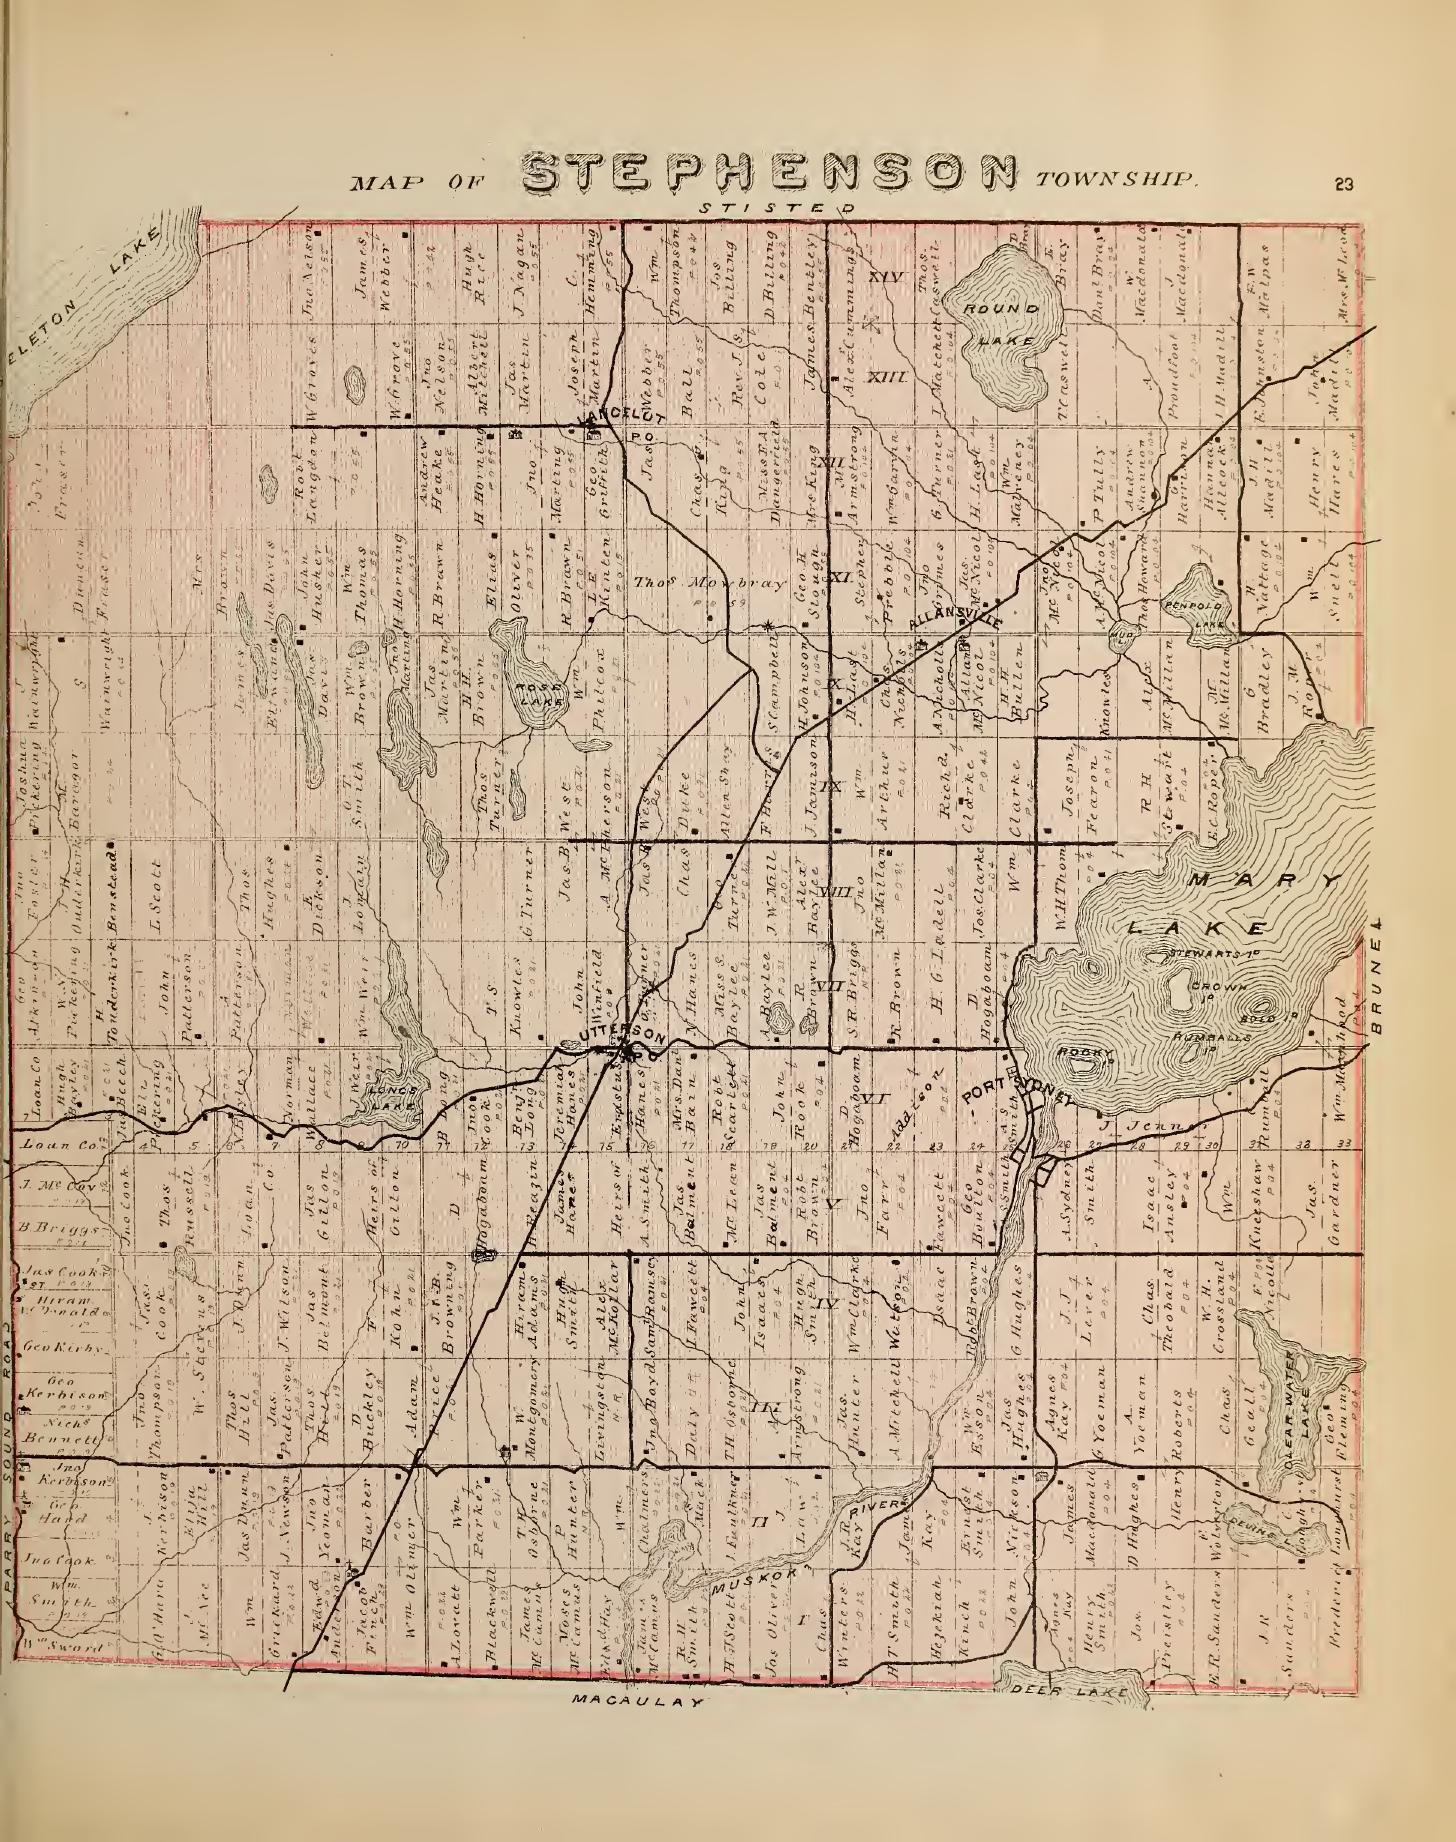 Historical map showing Concessions and Lots for stephenson